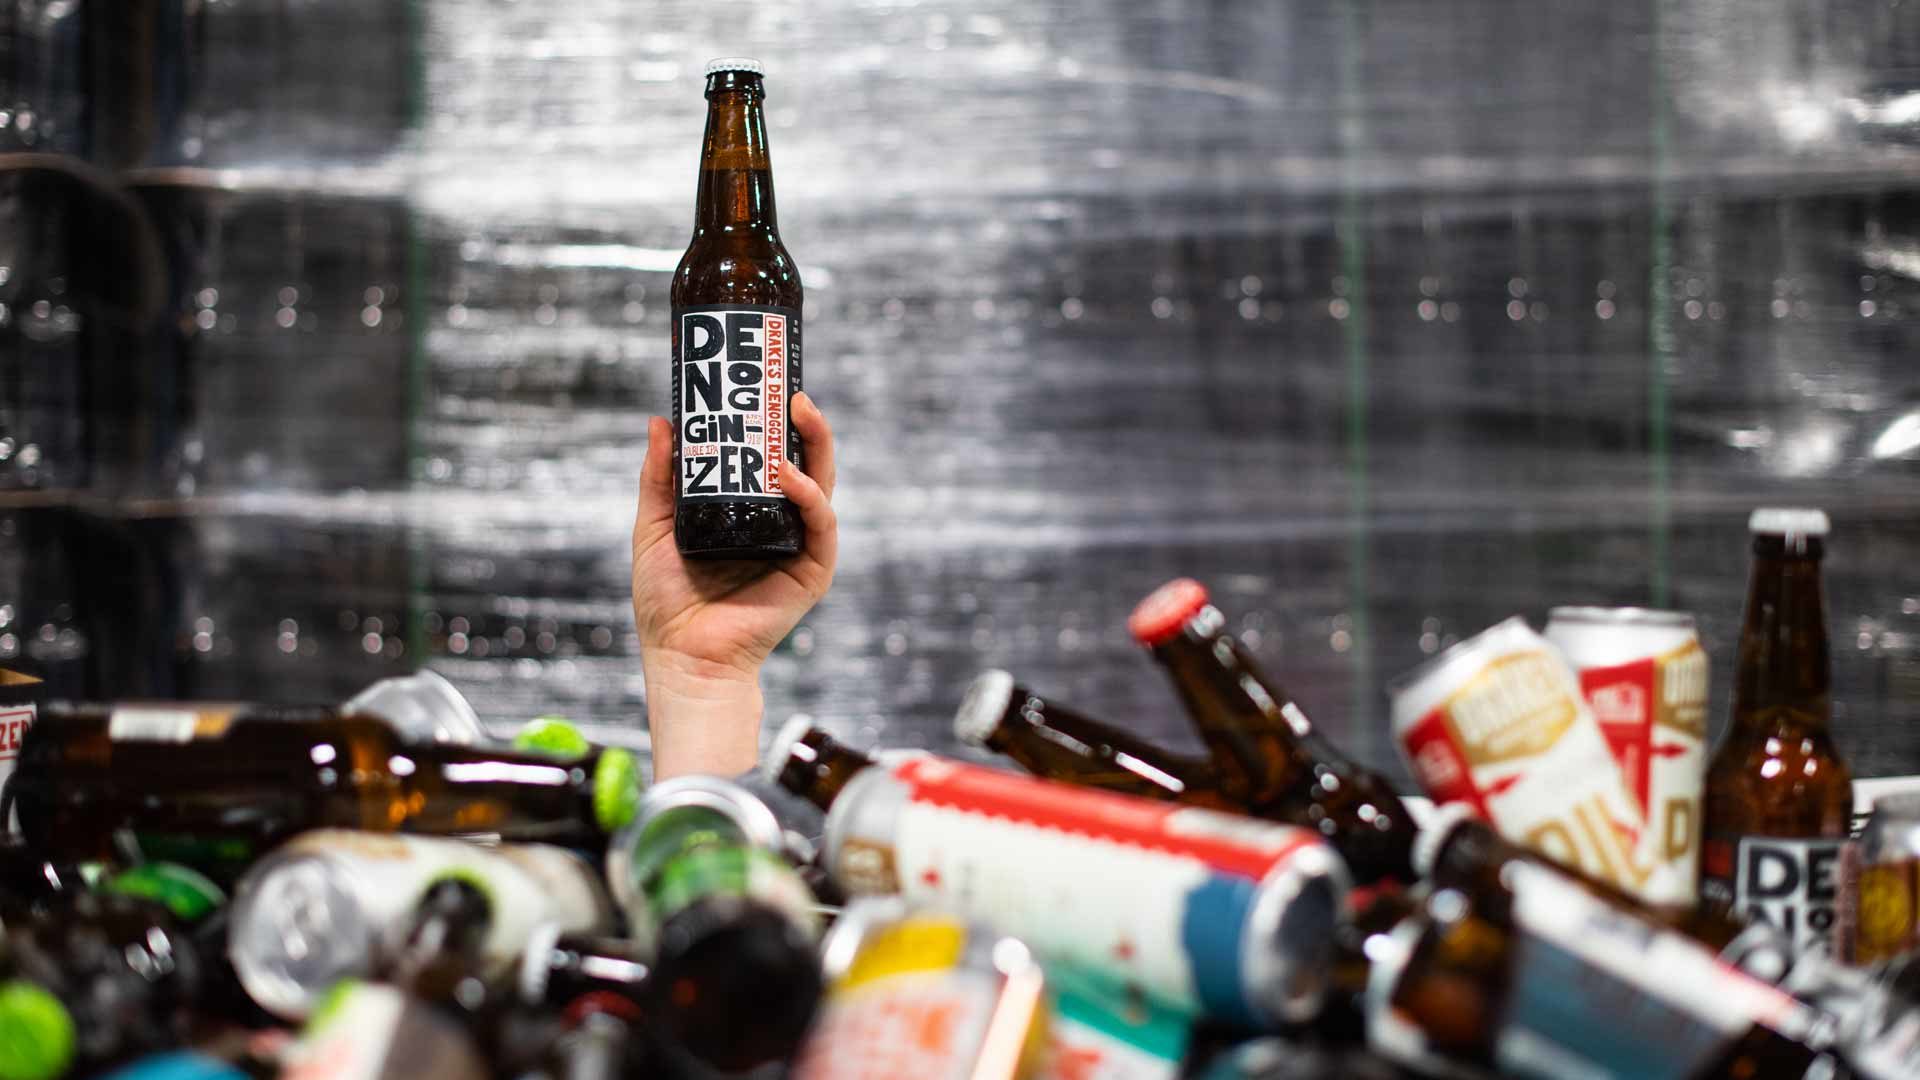 A bottle of Denogginizer Double IPA being held above a pile of cans and bottles